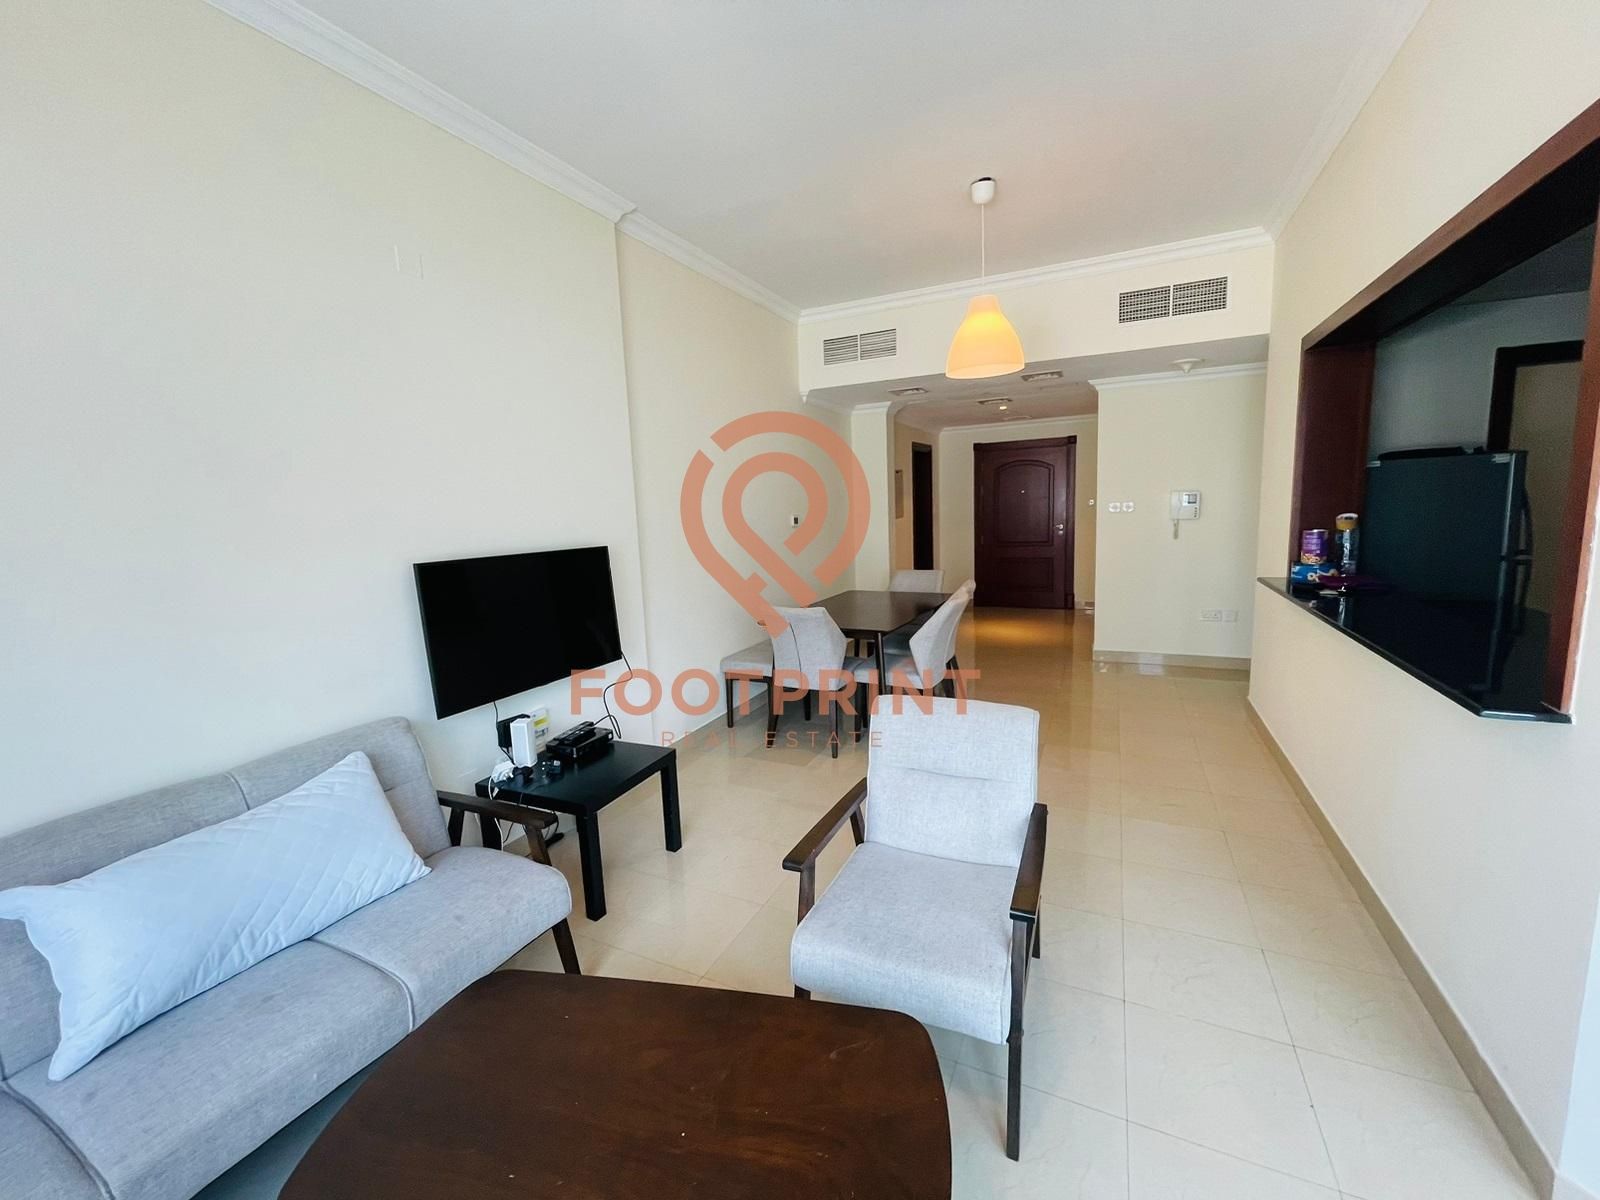 FULLY FURNISHED | 2 BEDROOM| CLOSE TO METRO